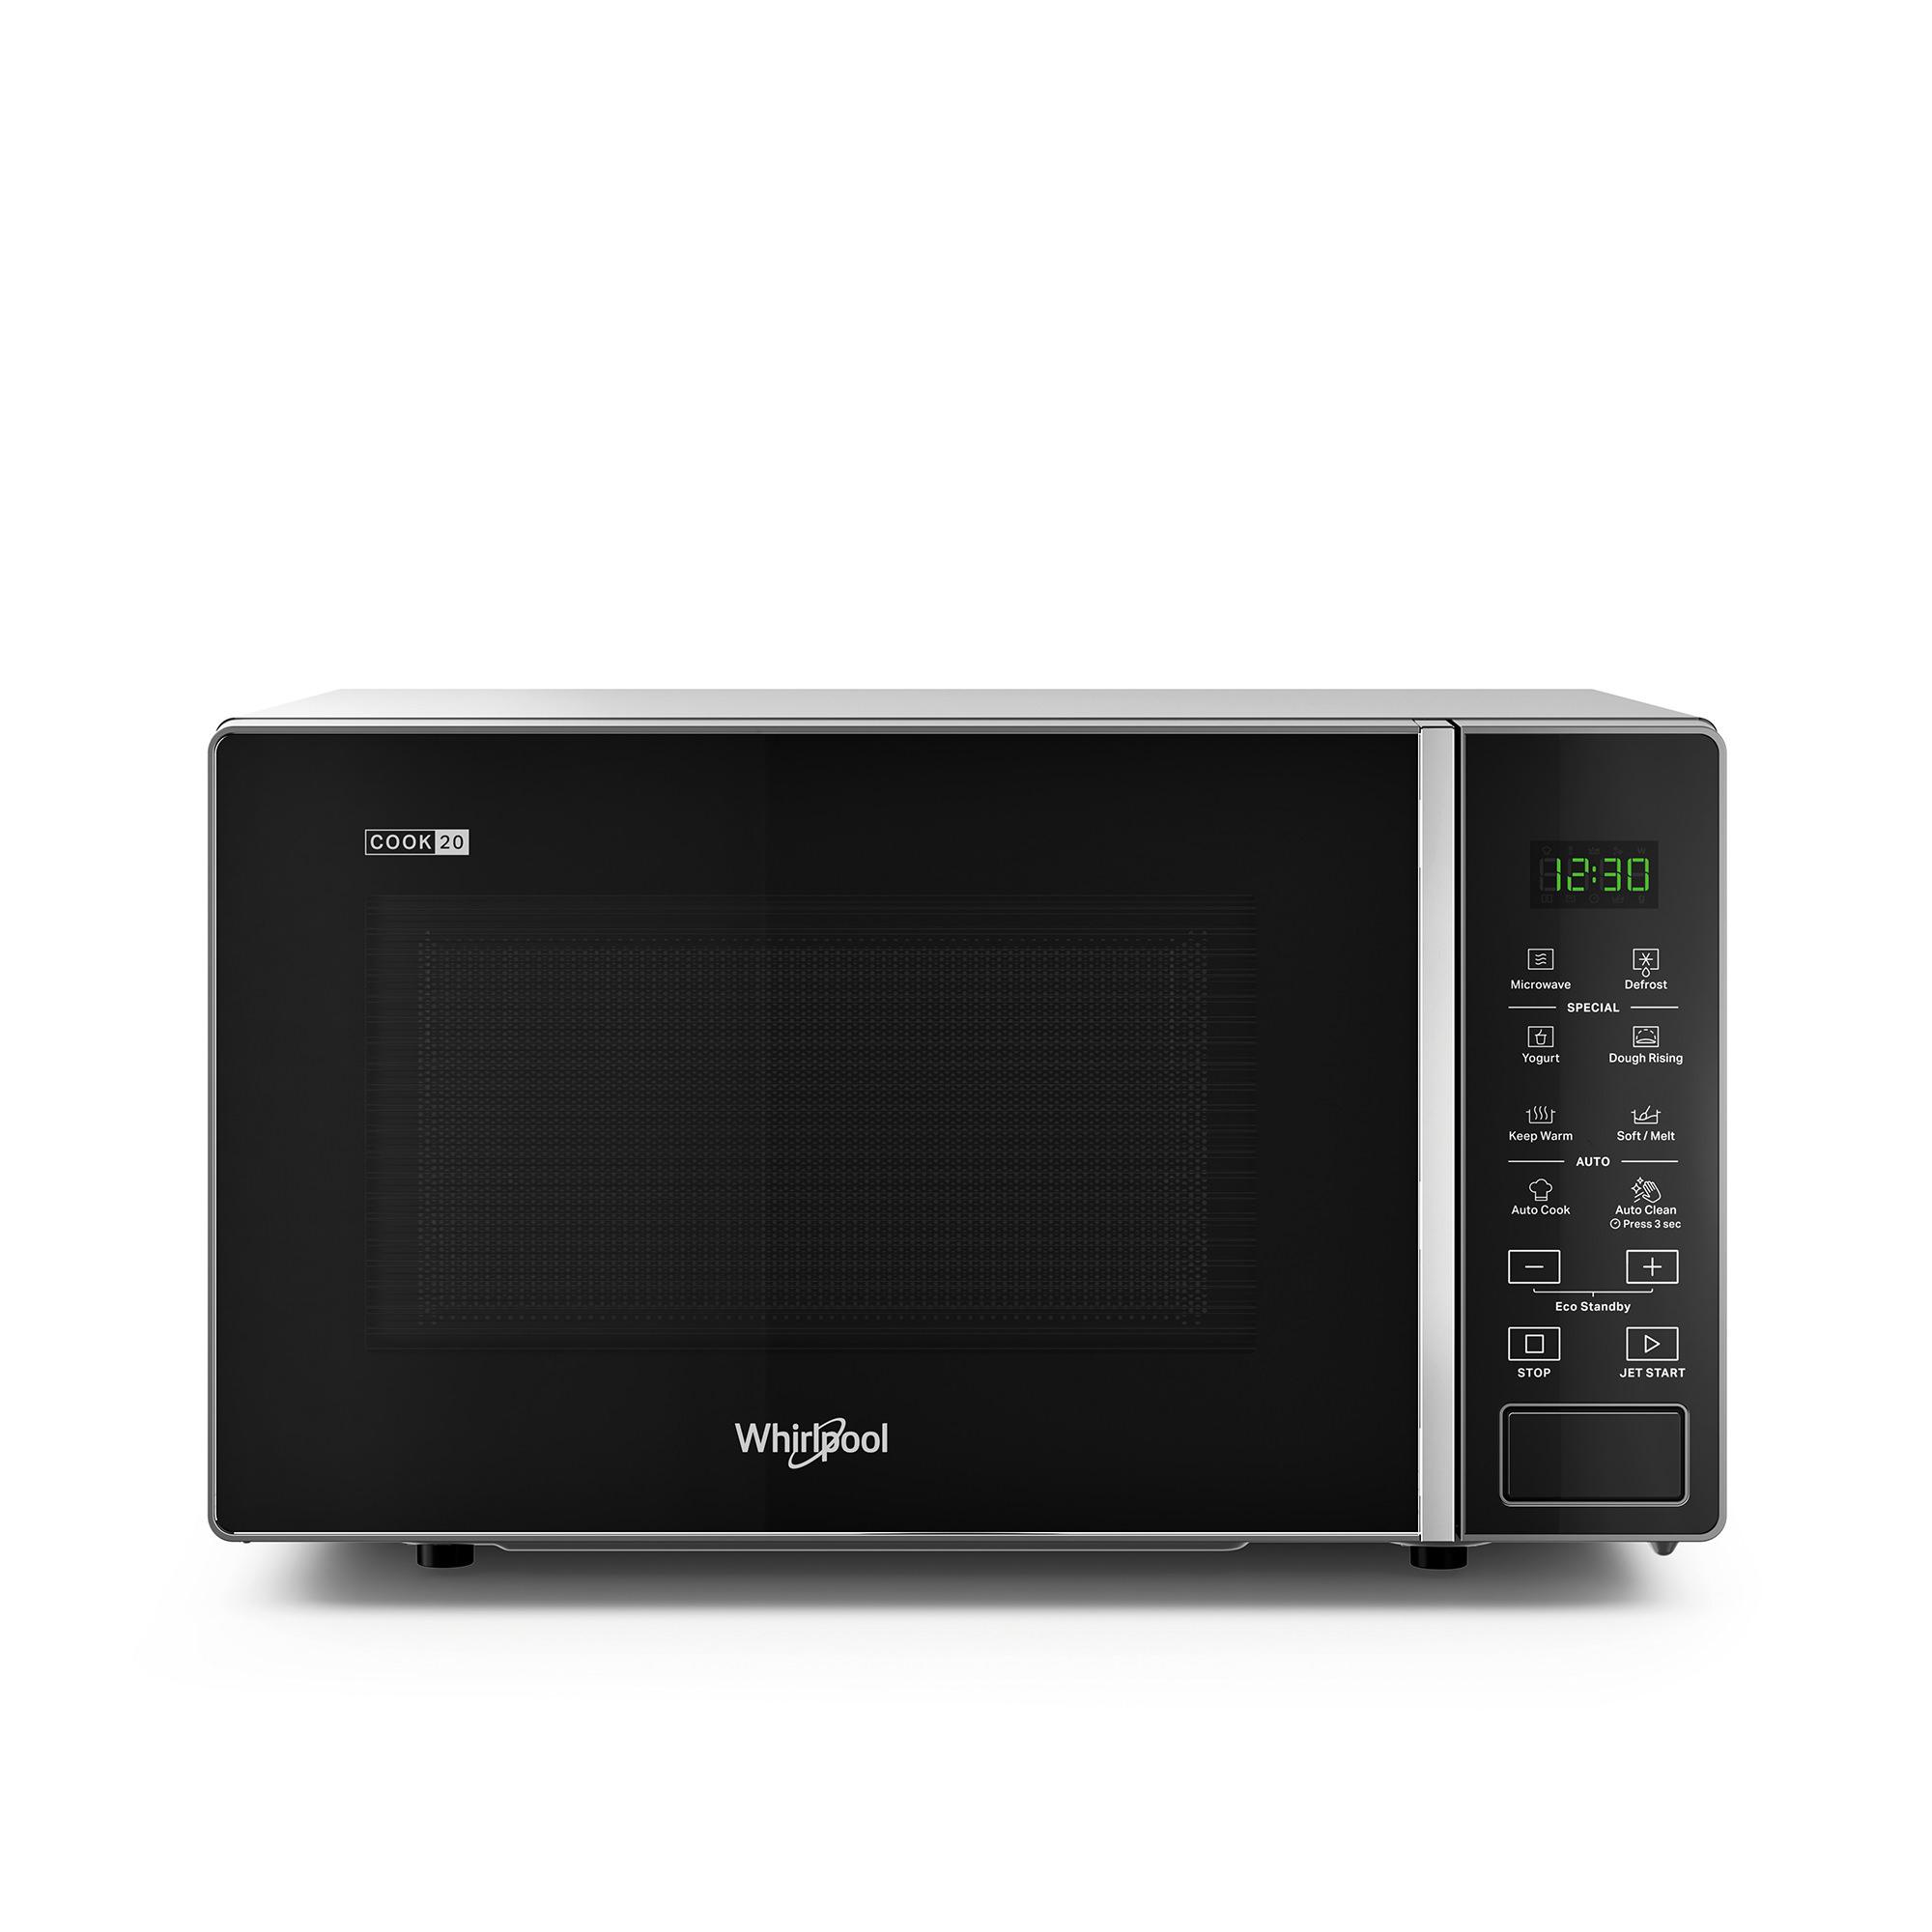 Whirlpool Microwave Oven 20L Black Image 3